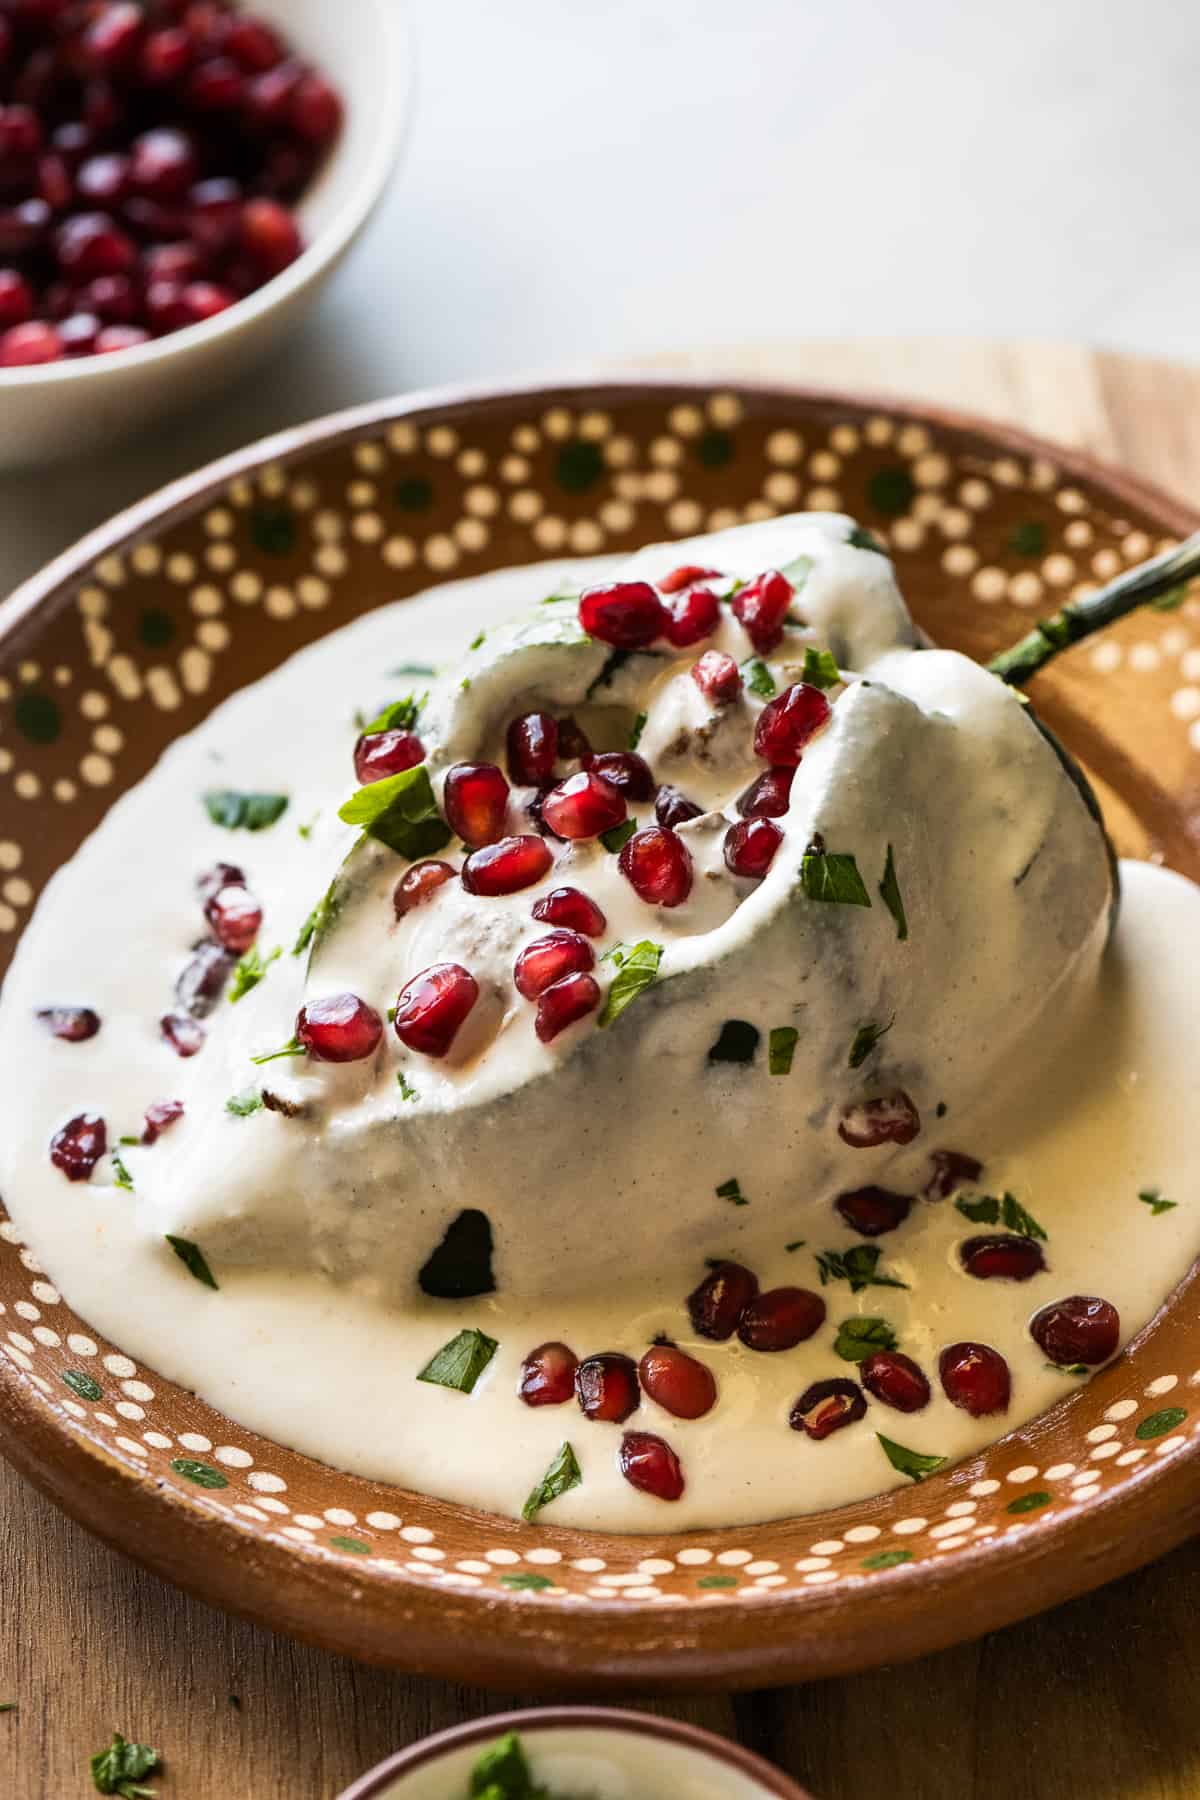 A chile en nogada on a plate garnished with pomegranate seeds and parsley.